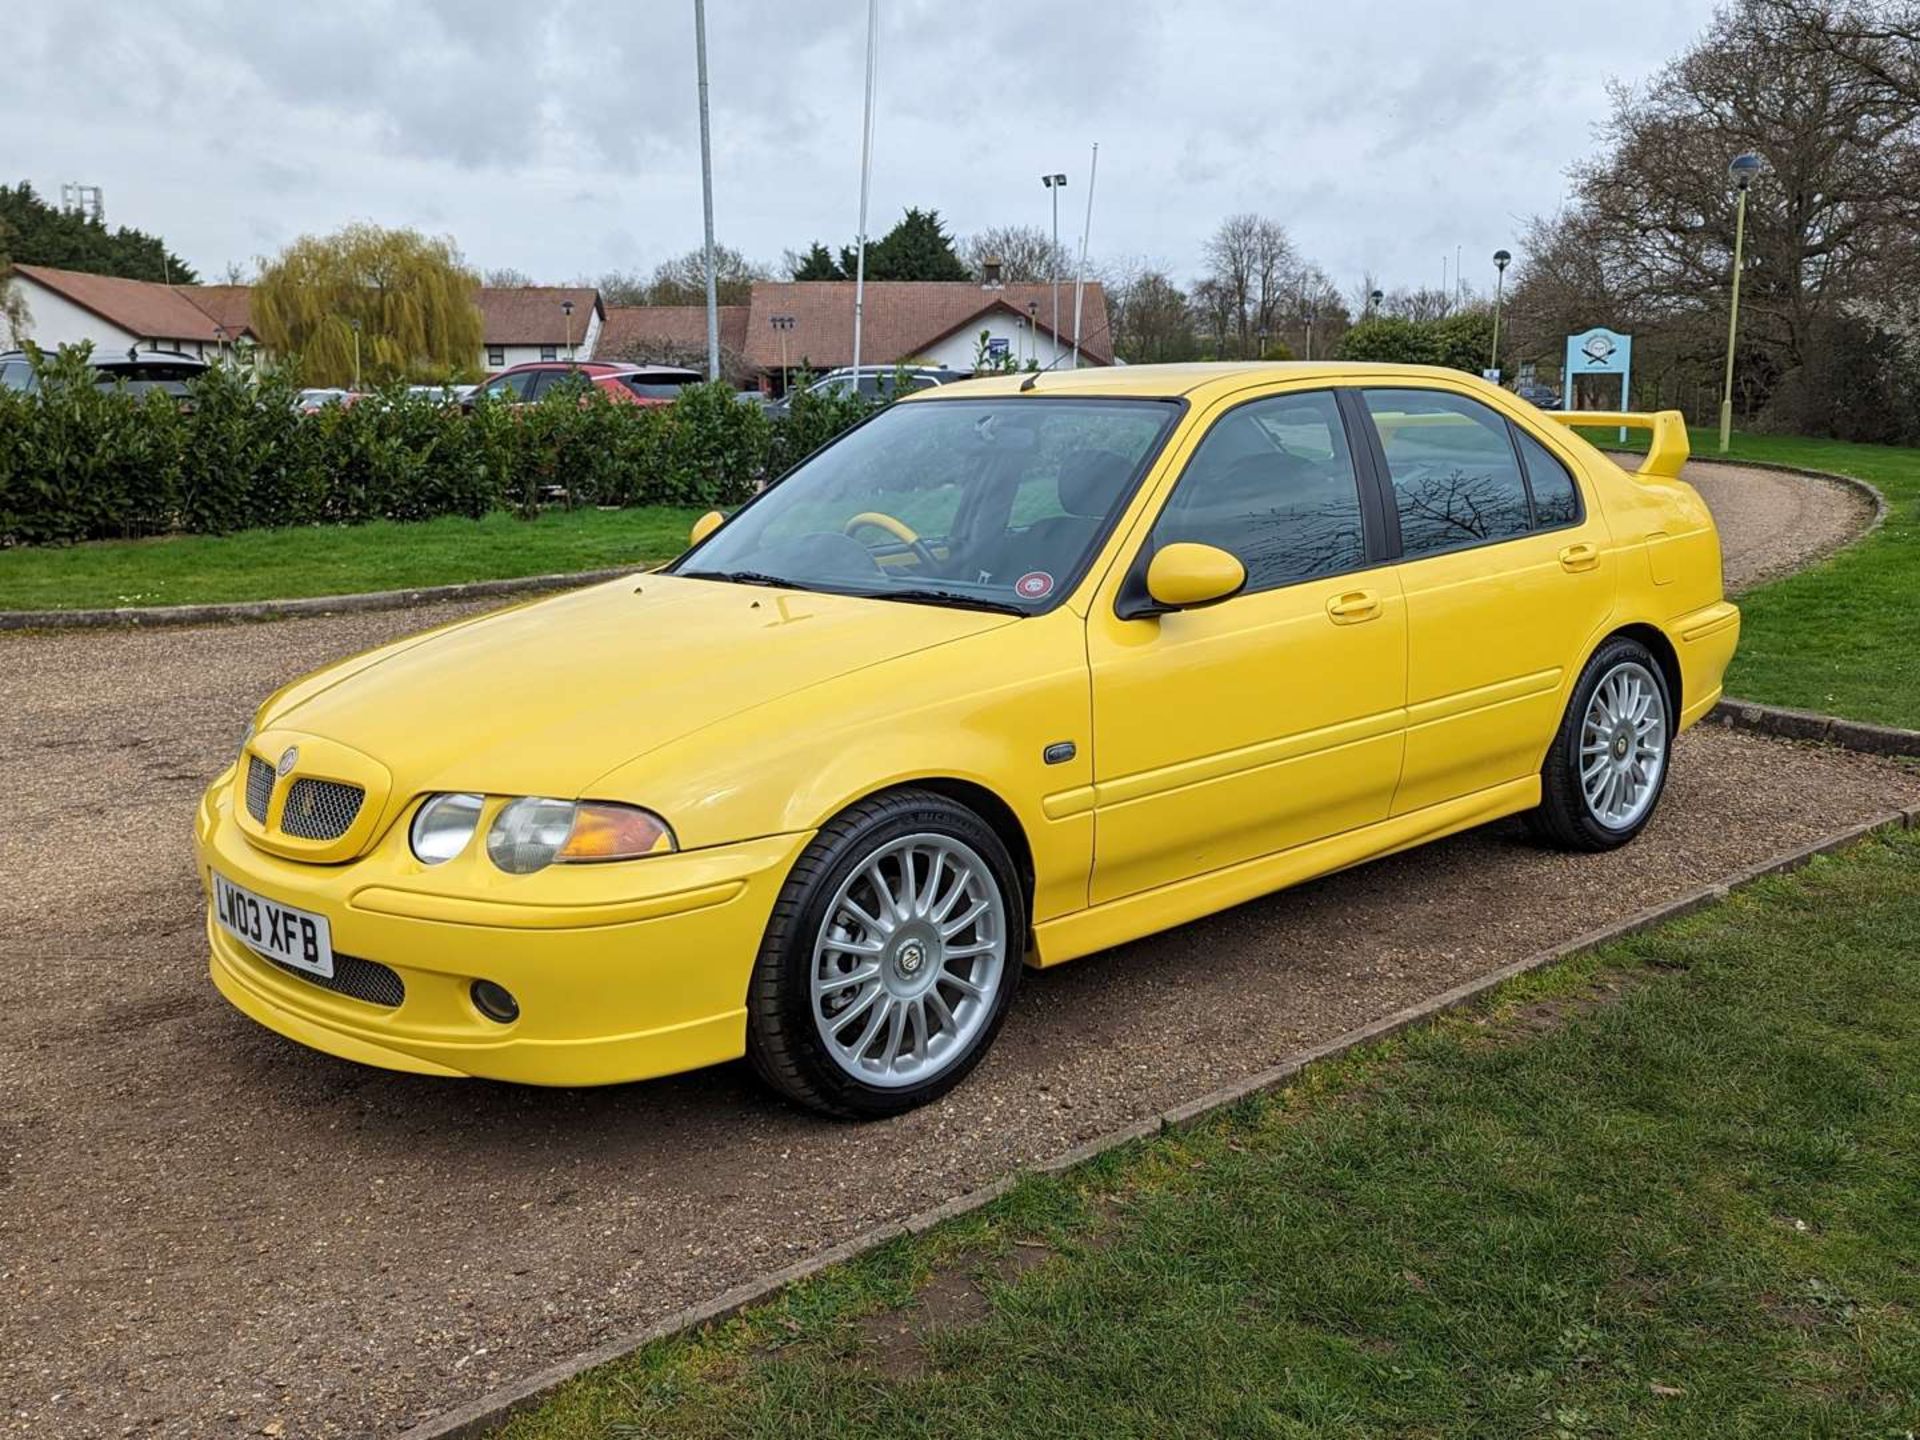 2003 MG ZS 180&nbsp; - Image 3 of 30